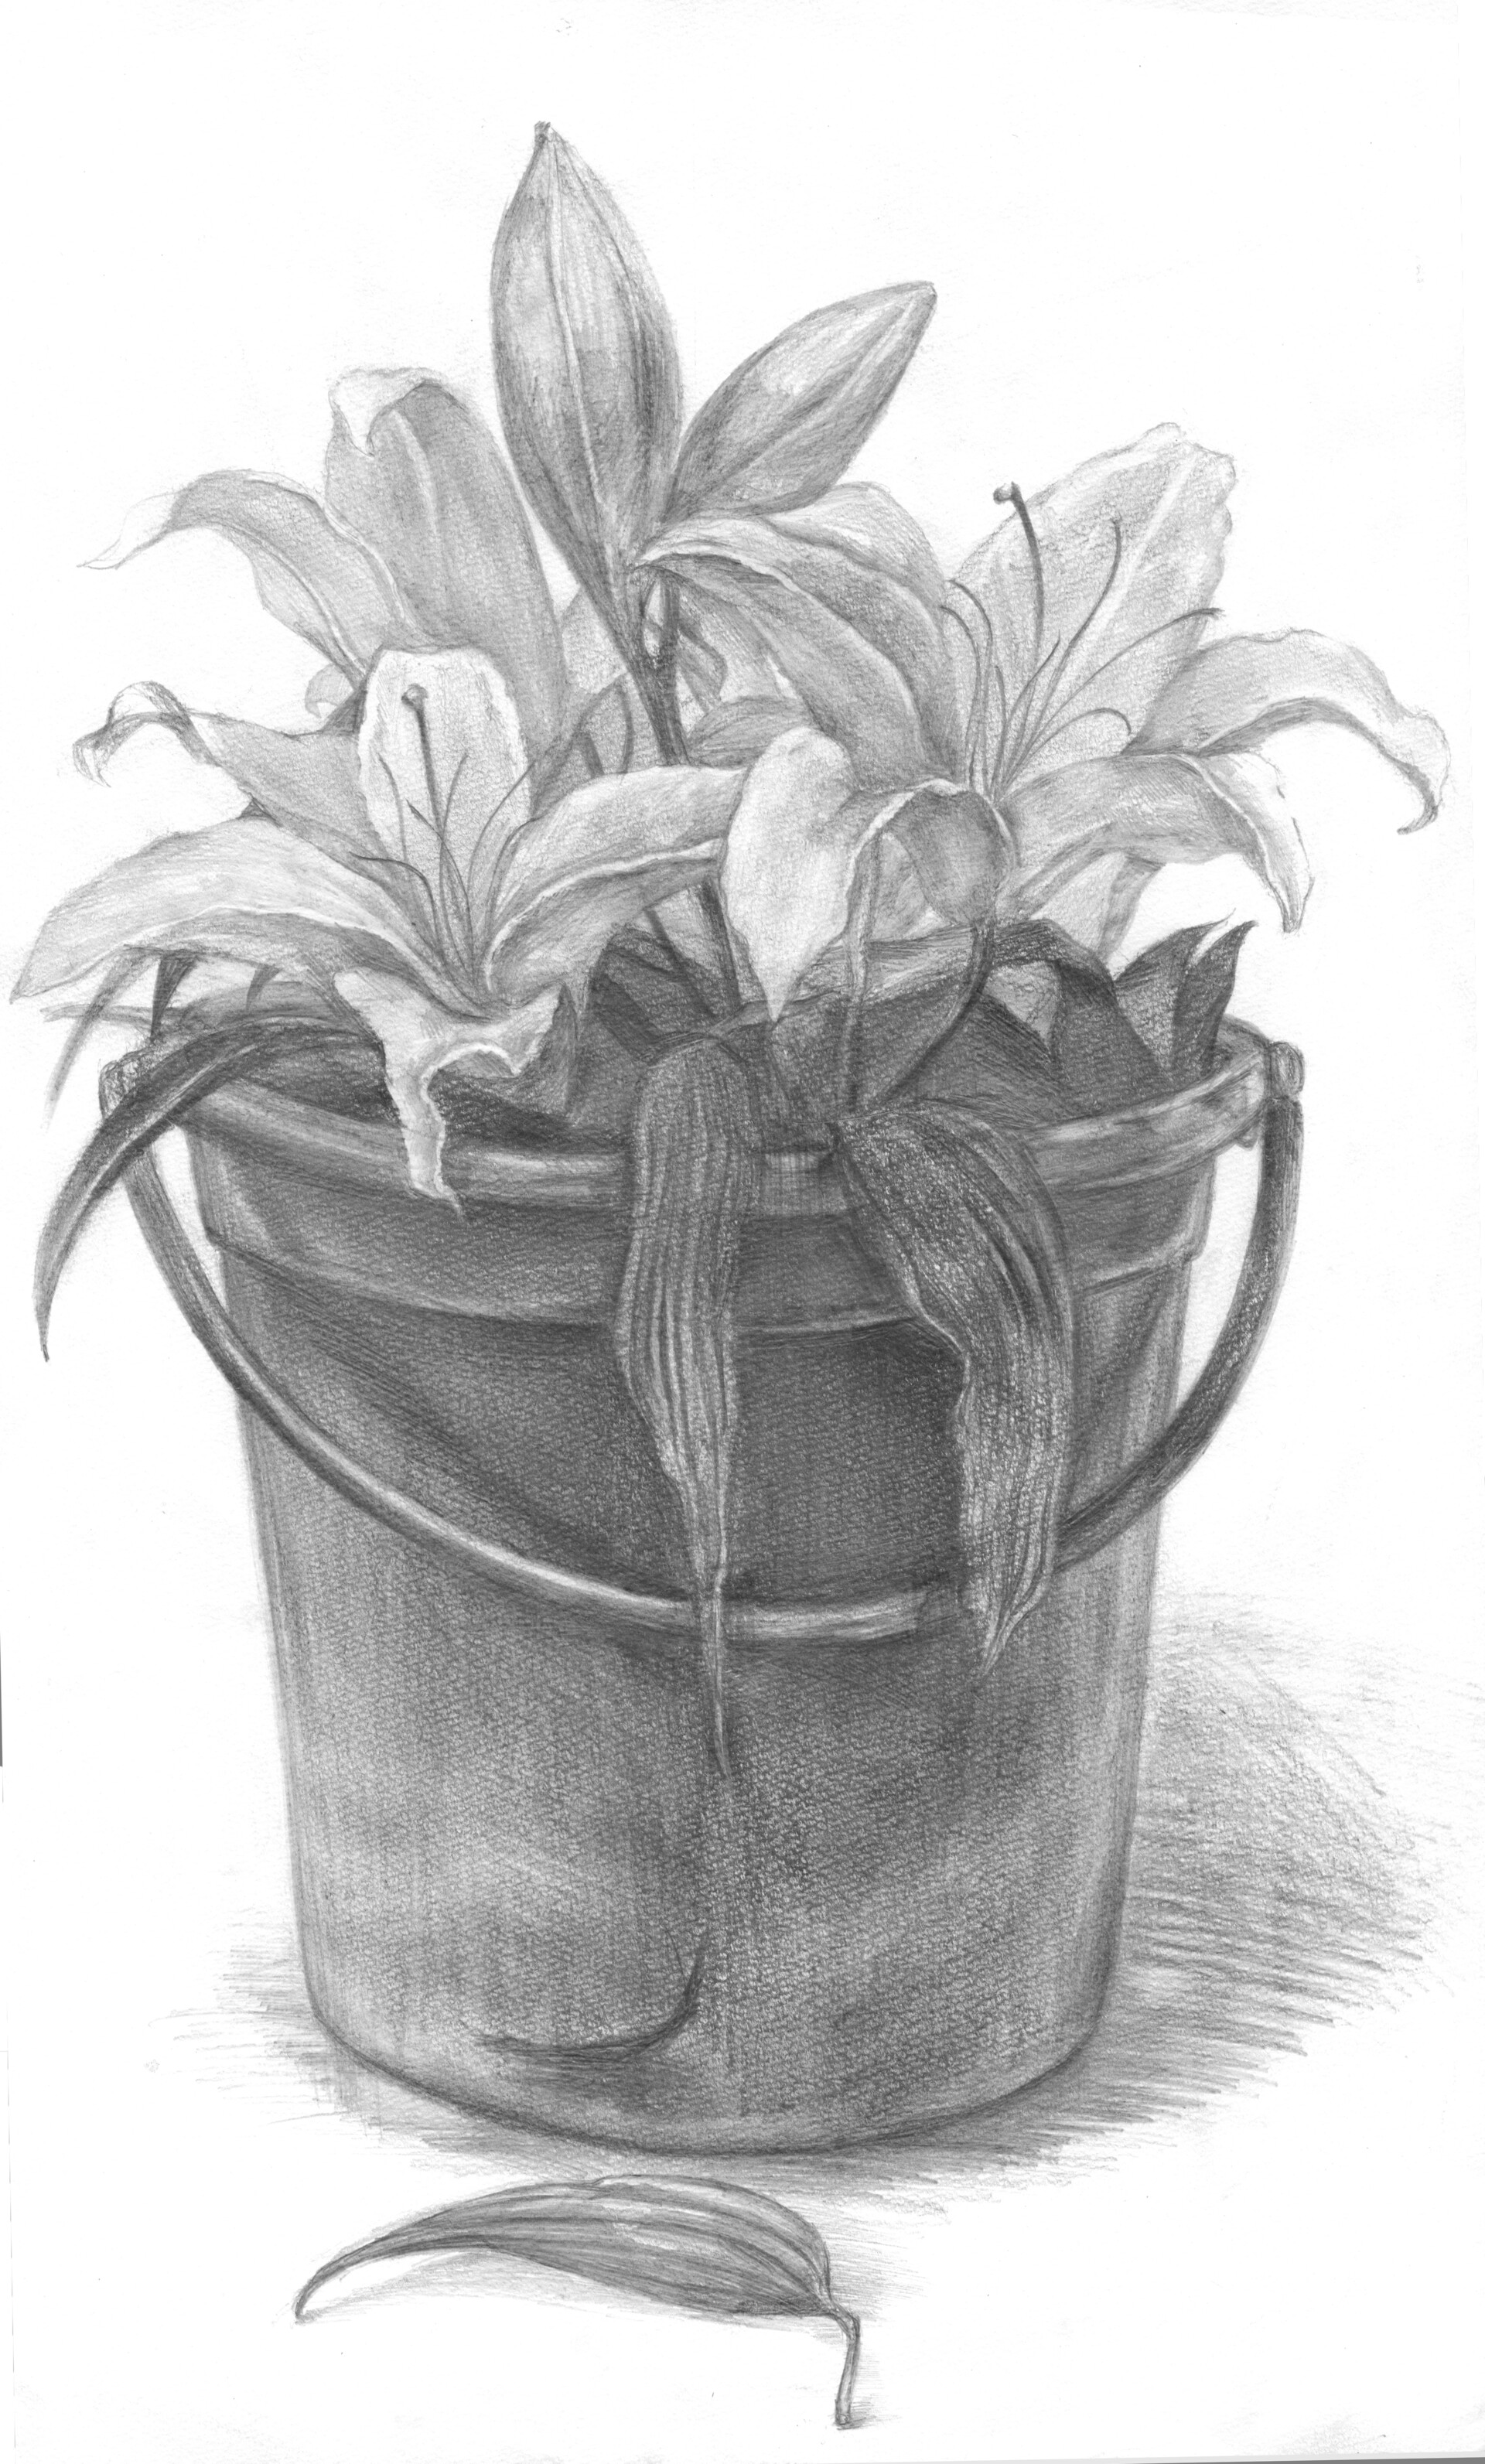 A flower pot sketch I made : r/drawing